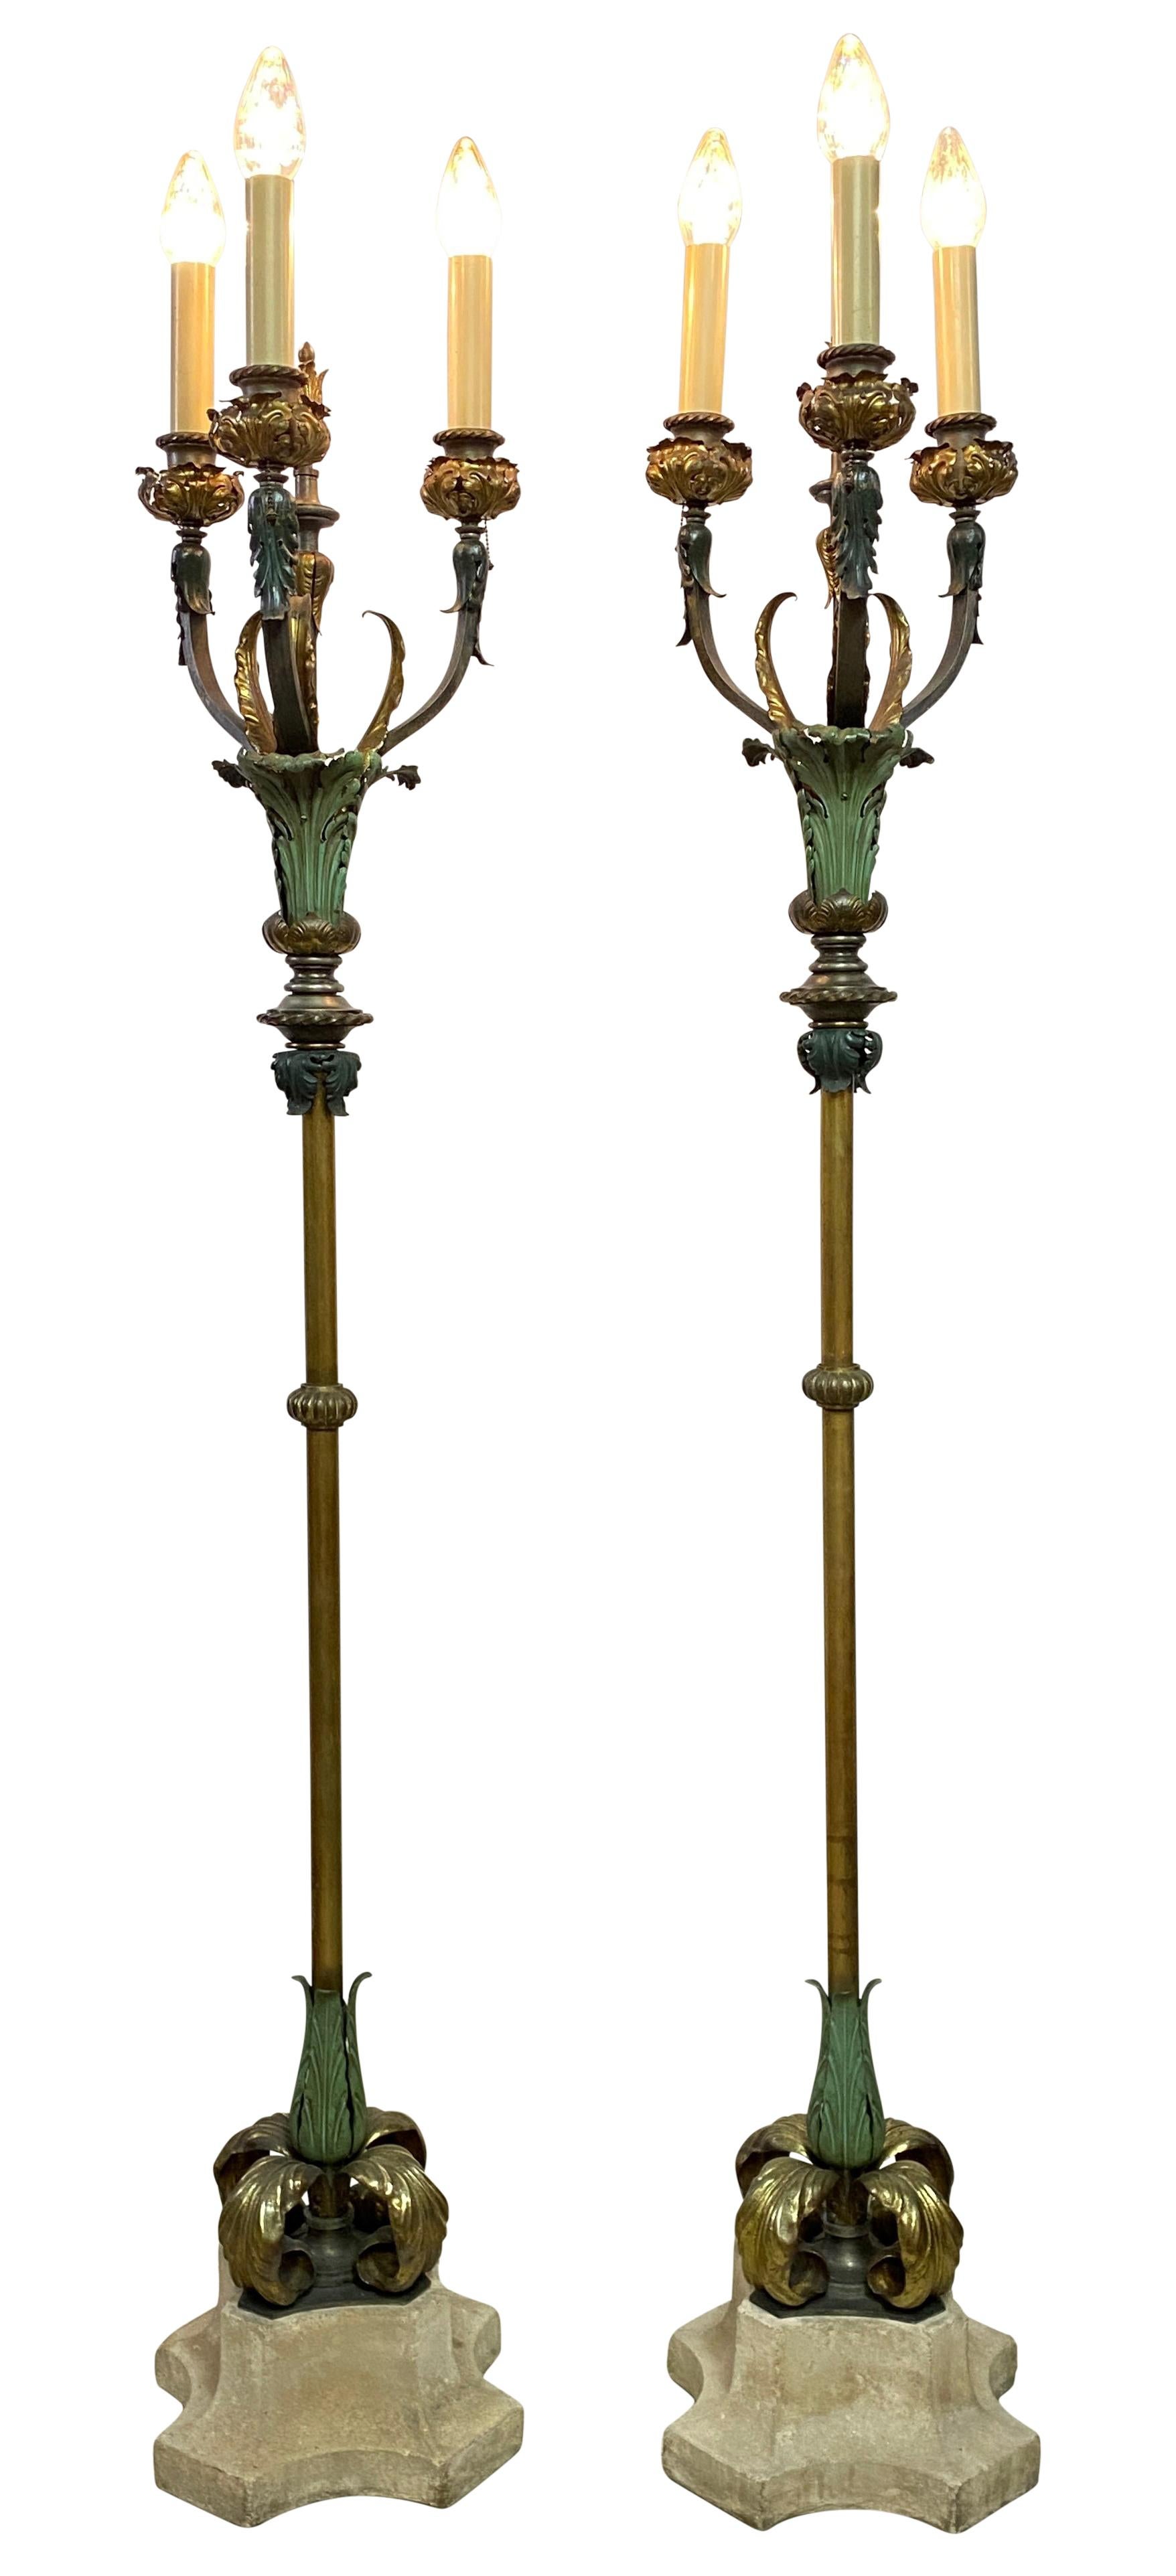 An exceptional pair of early 20th century Mediterranean style painted an patinated brass floor lamps on limestone bases. Recently re-wired, all sockets have chain pulls, in excellent antique condition.
European, possibly Italian, circa 1920.
